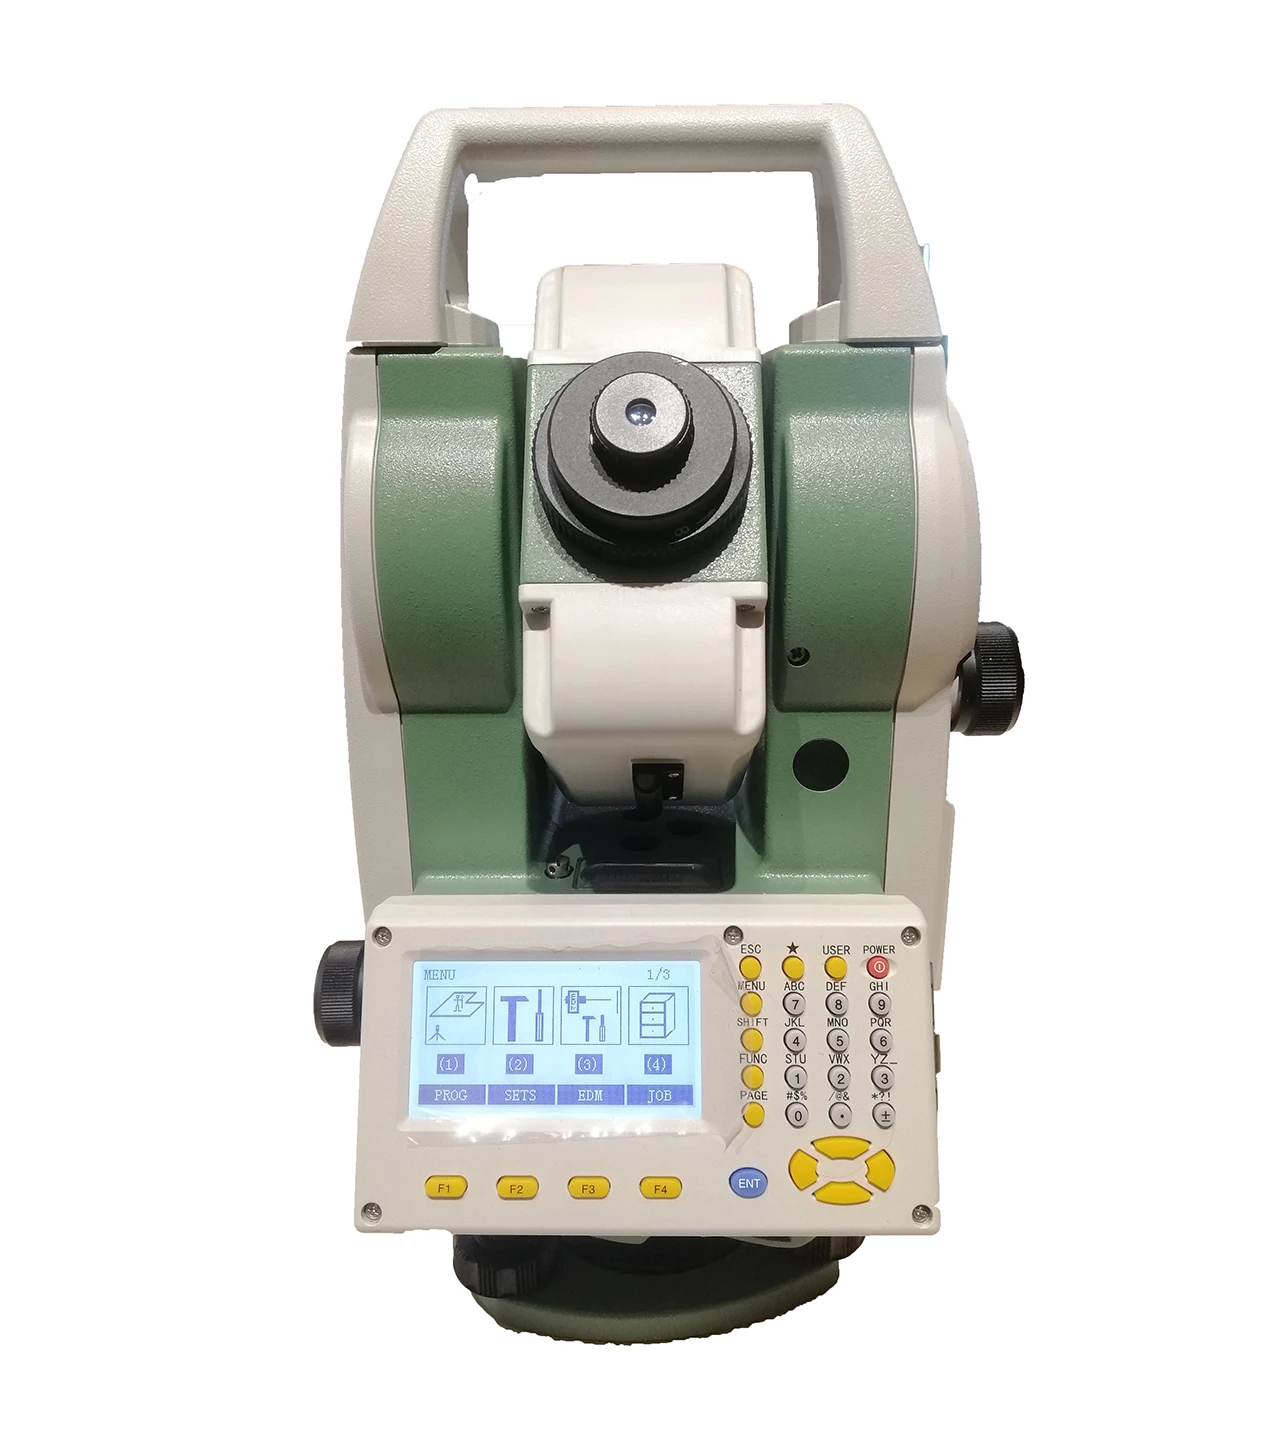 High End Total Station Semi Automatic Total Station Surveying Instrument for Engineering & Construction Survey